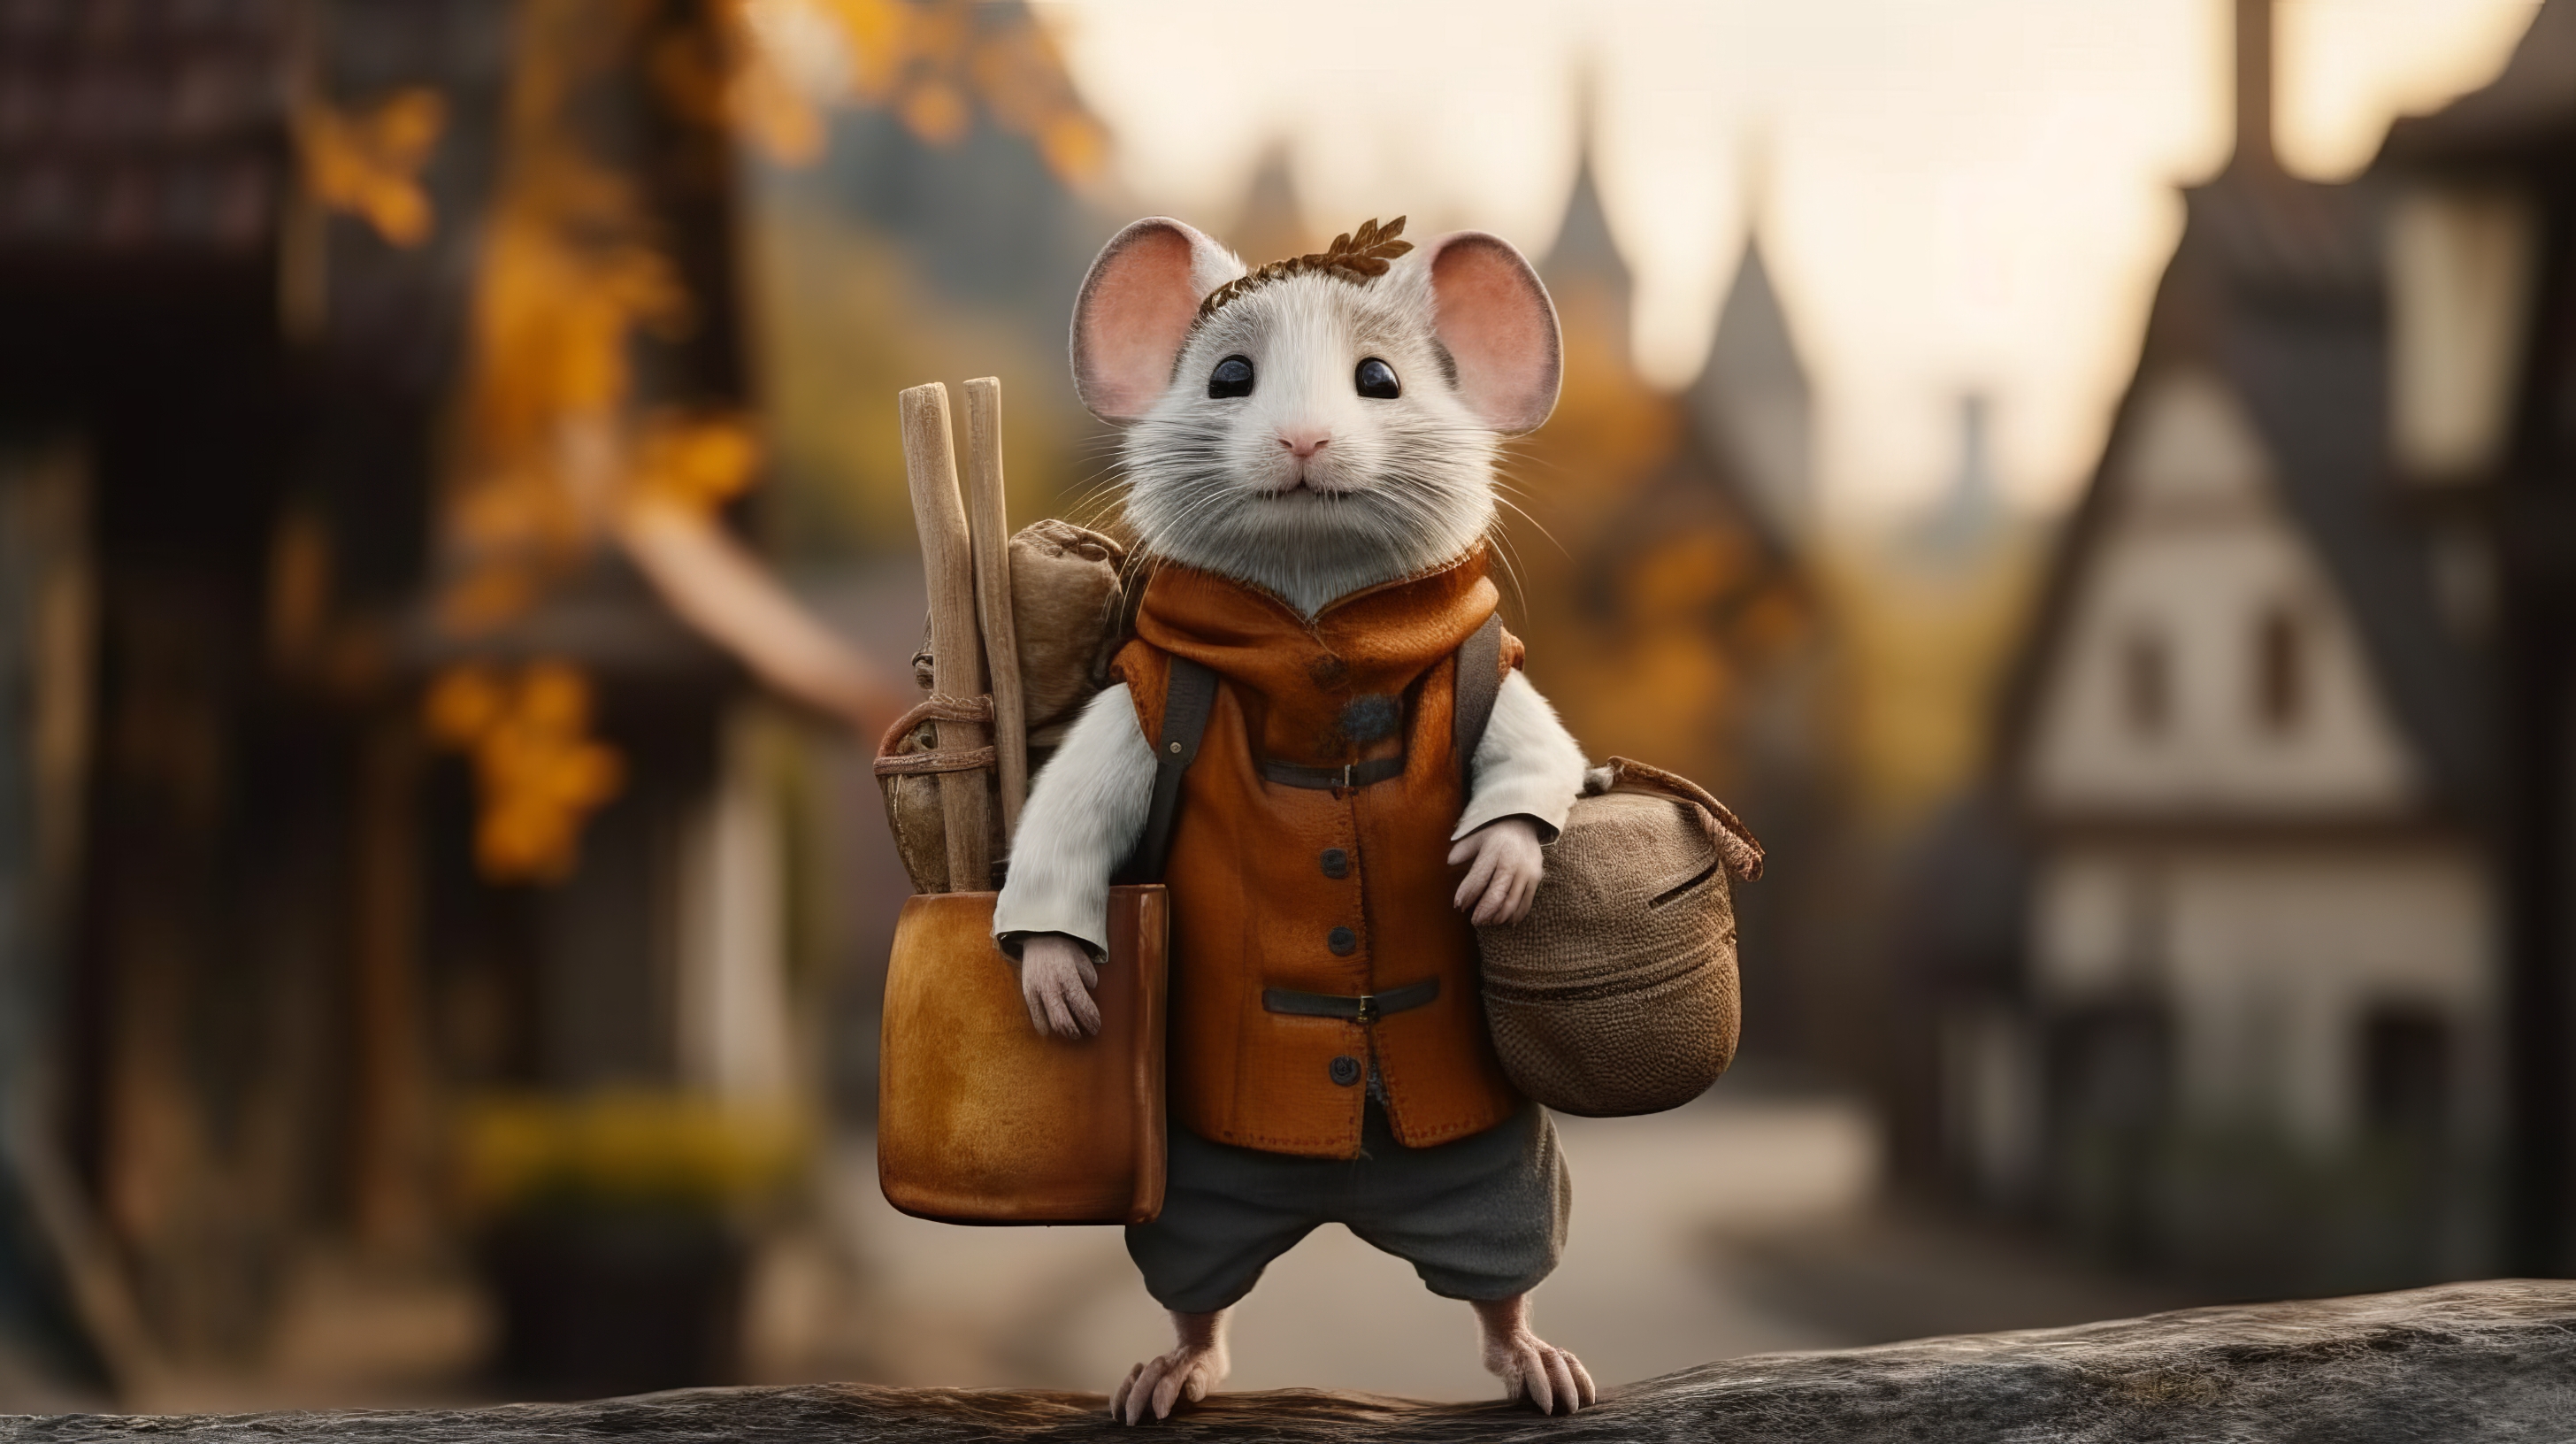 General 2912x1632 AI art portrait adventurers mice backpacks Tiny clothes German blurred blurry background animals looking at viewer village building